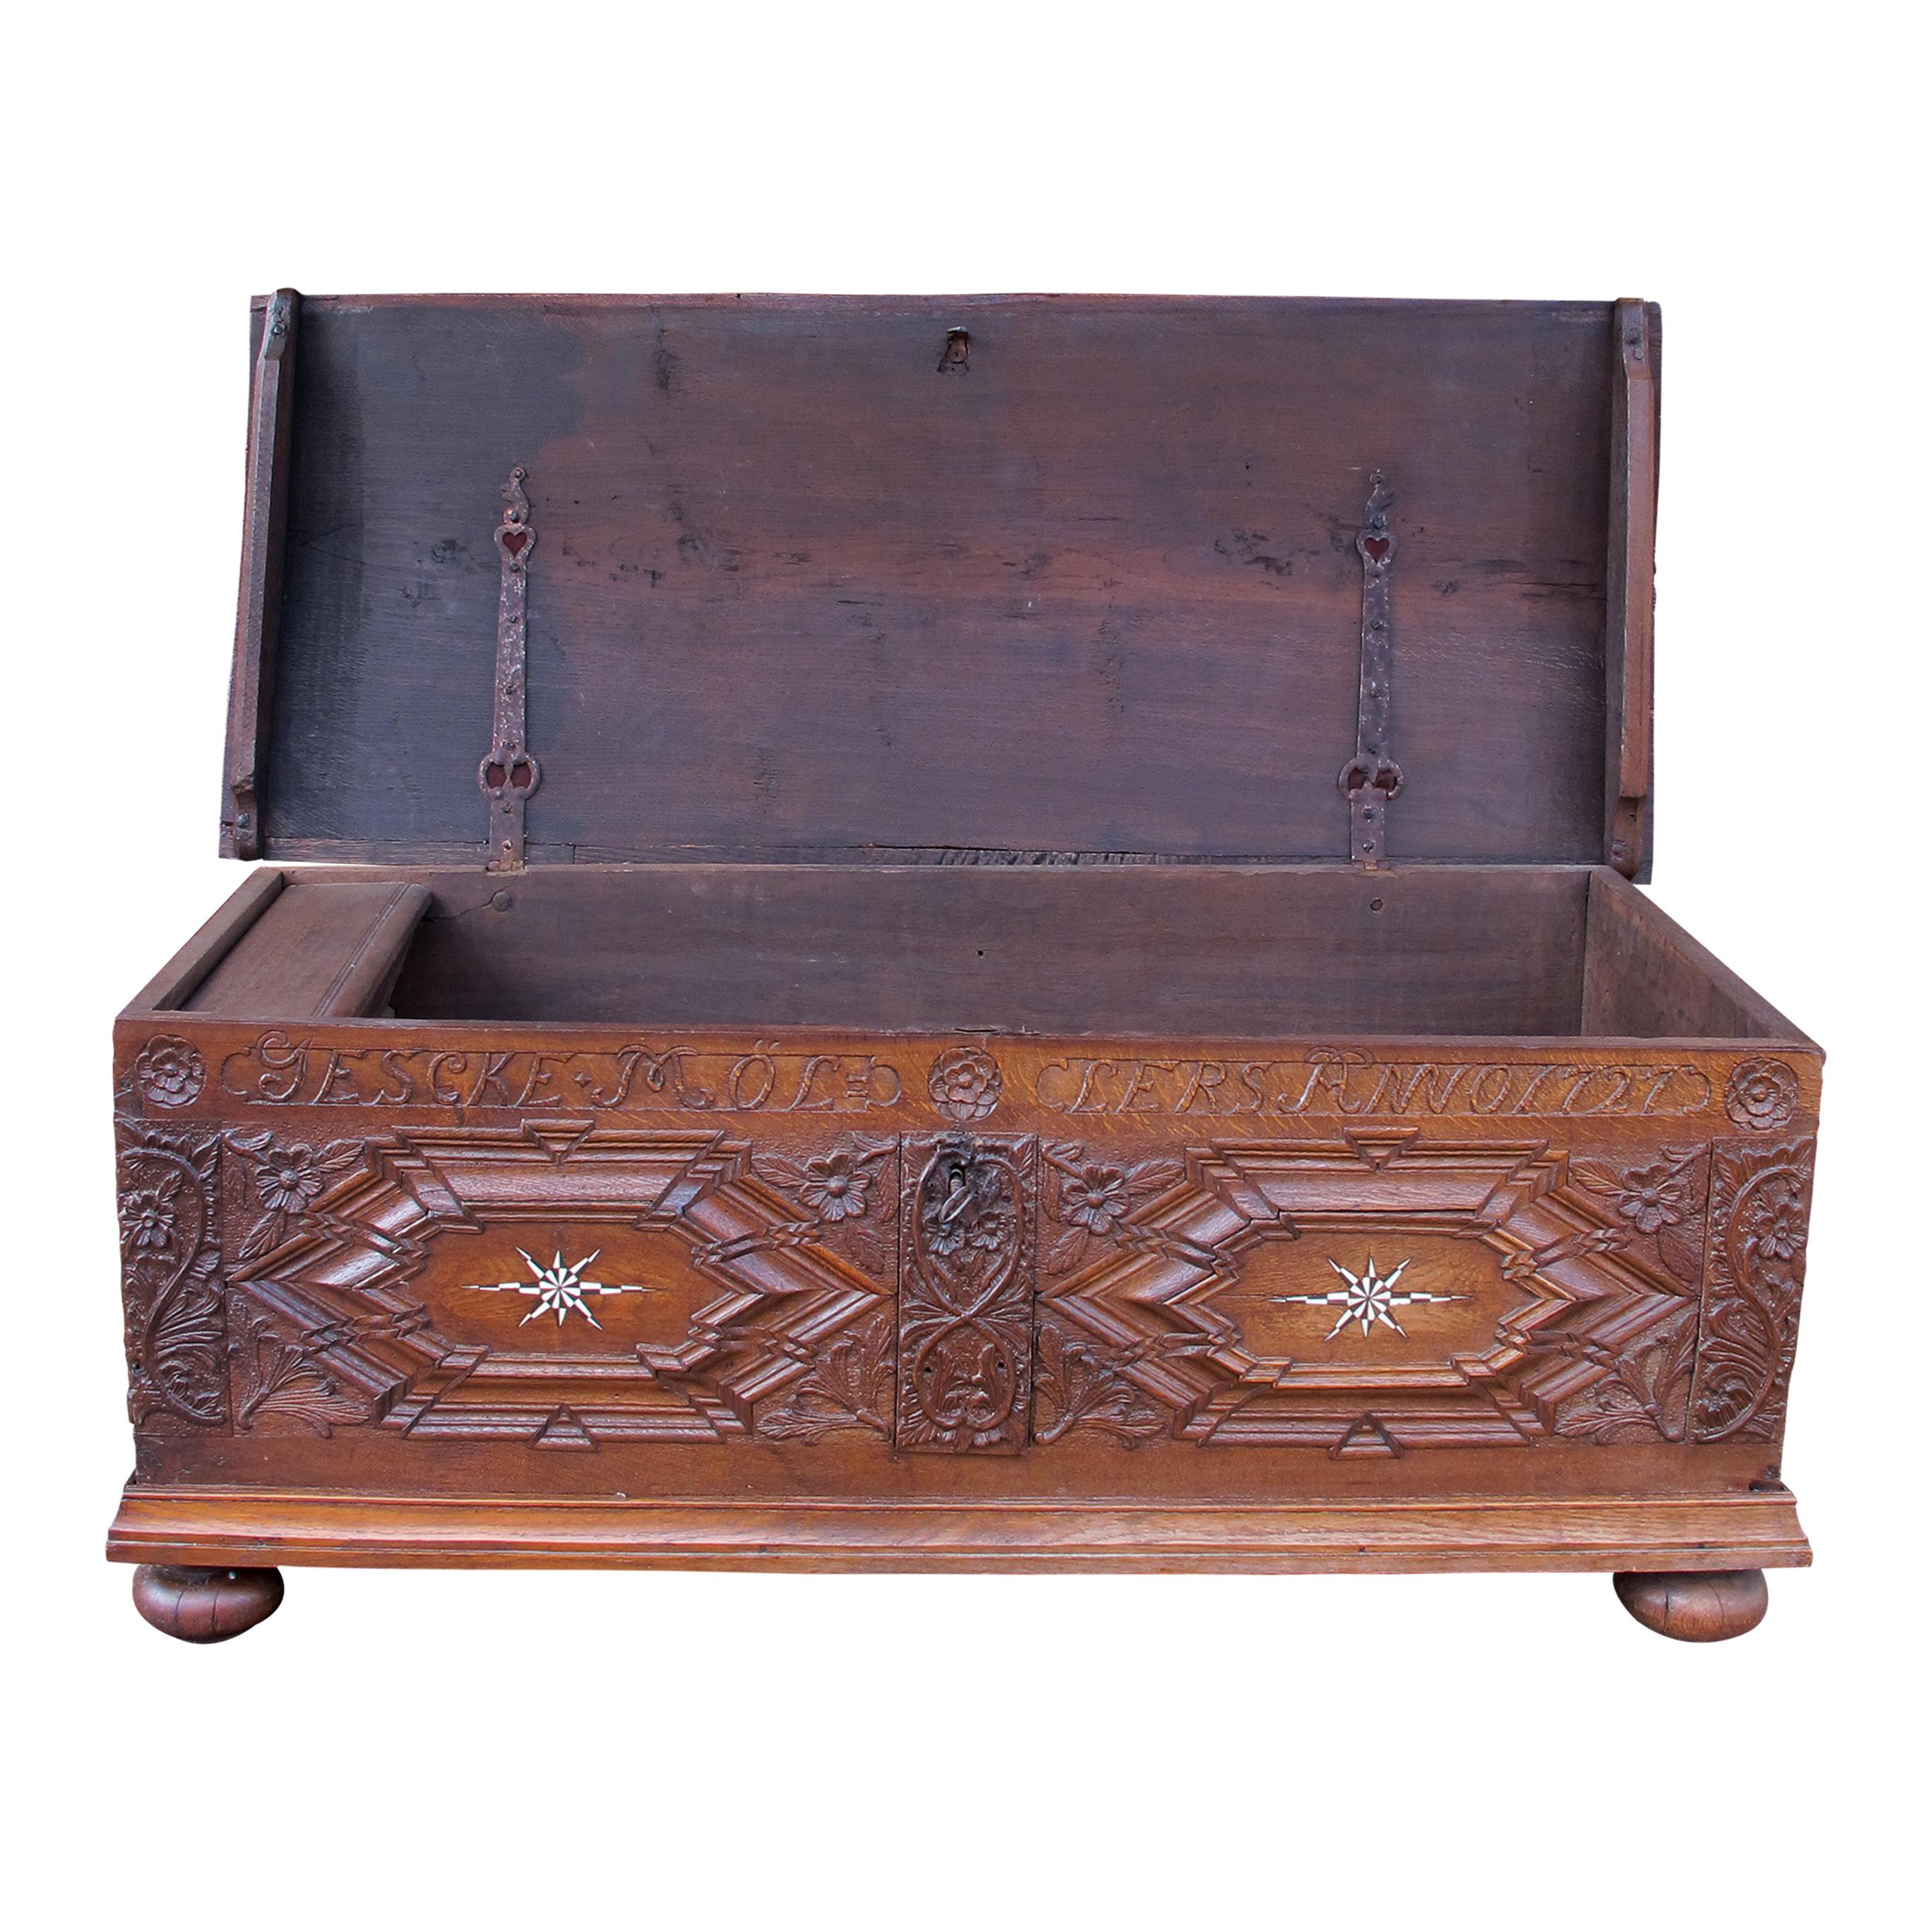 German Early 18th Century Large Marriage Oak Trunk With a Vaulted Lid and Carvings For Sale